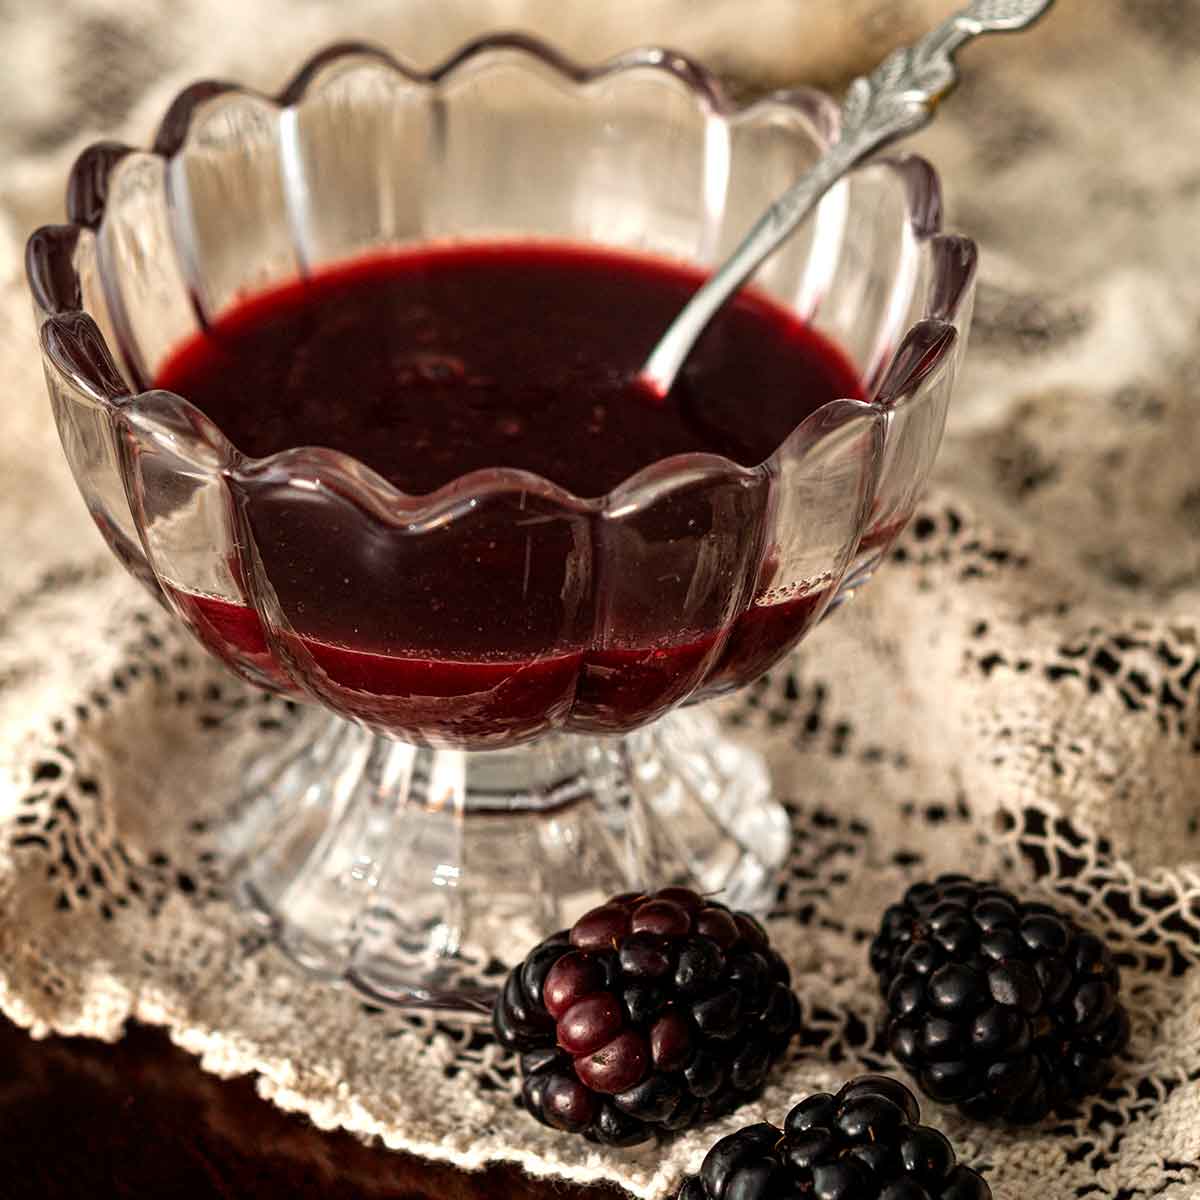 A decorative glass bowl of seedless blackberry sauce on lace beside 3 blackberries.